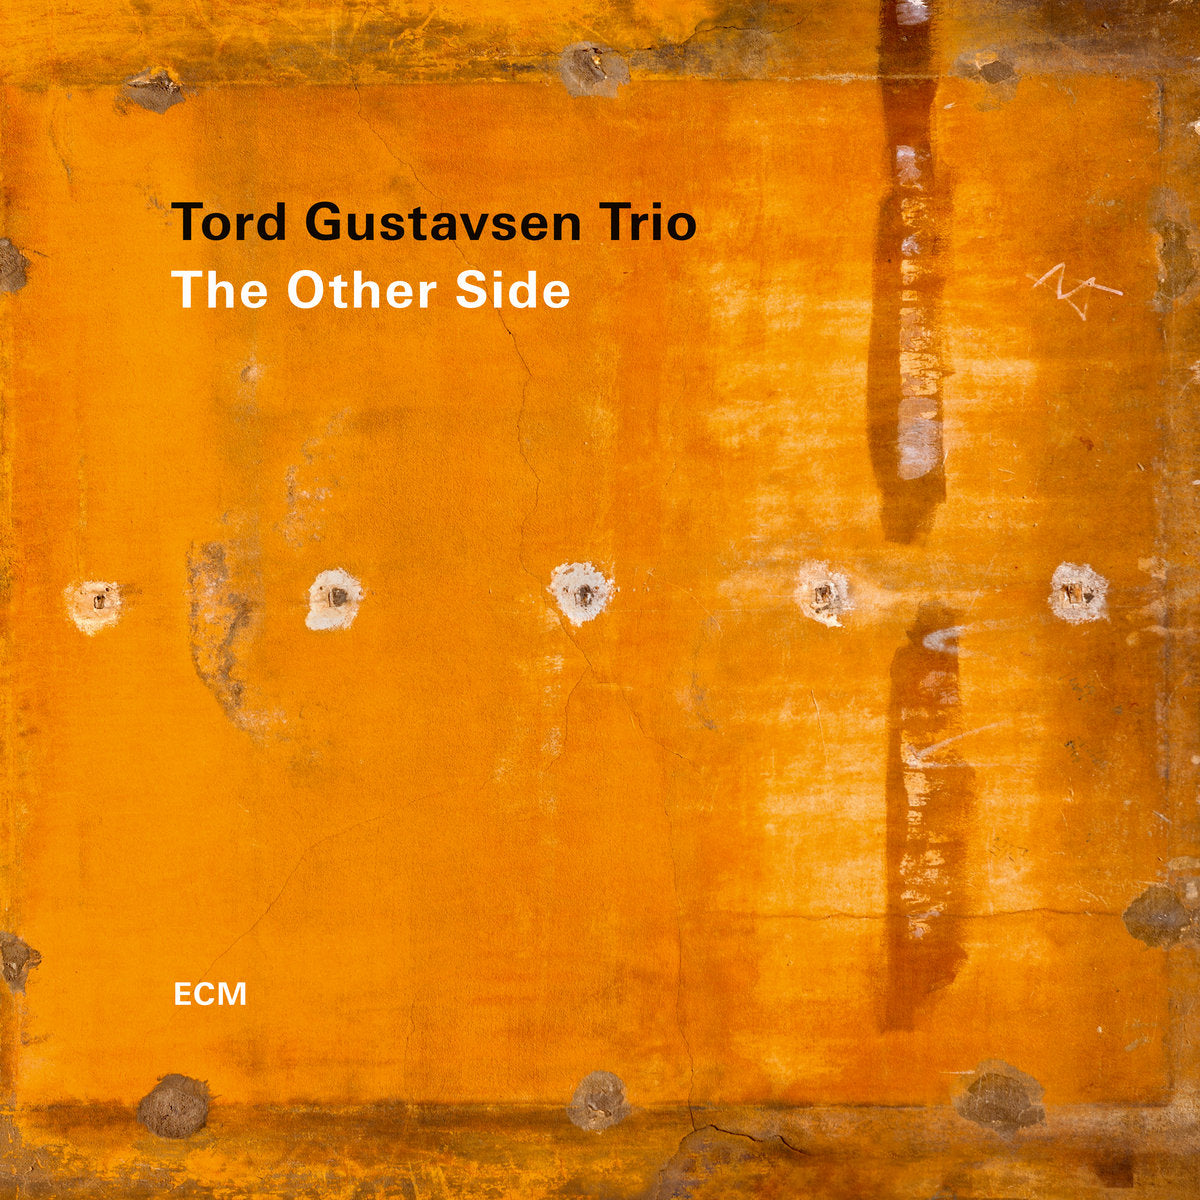 Tord Gustavsen Trio – The Other Side